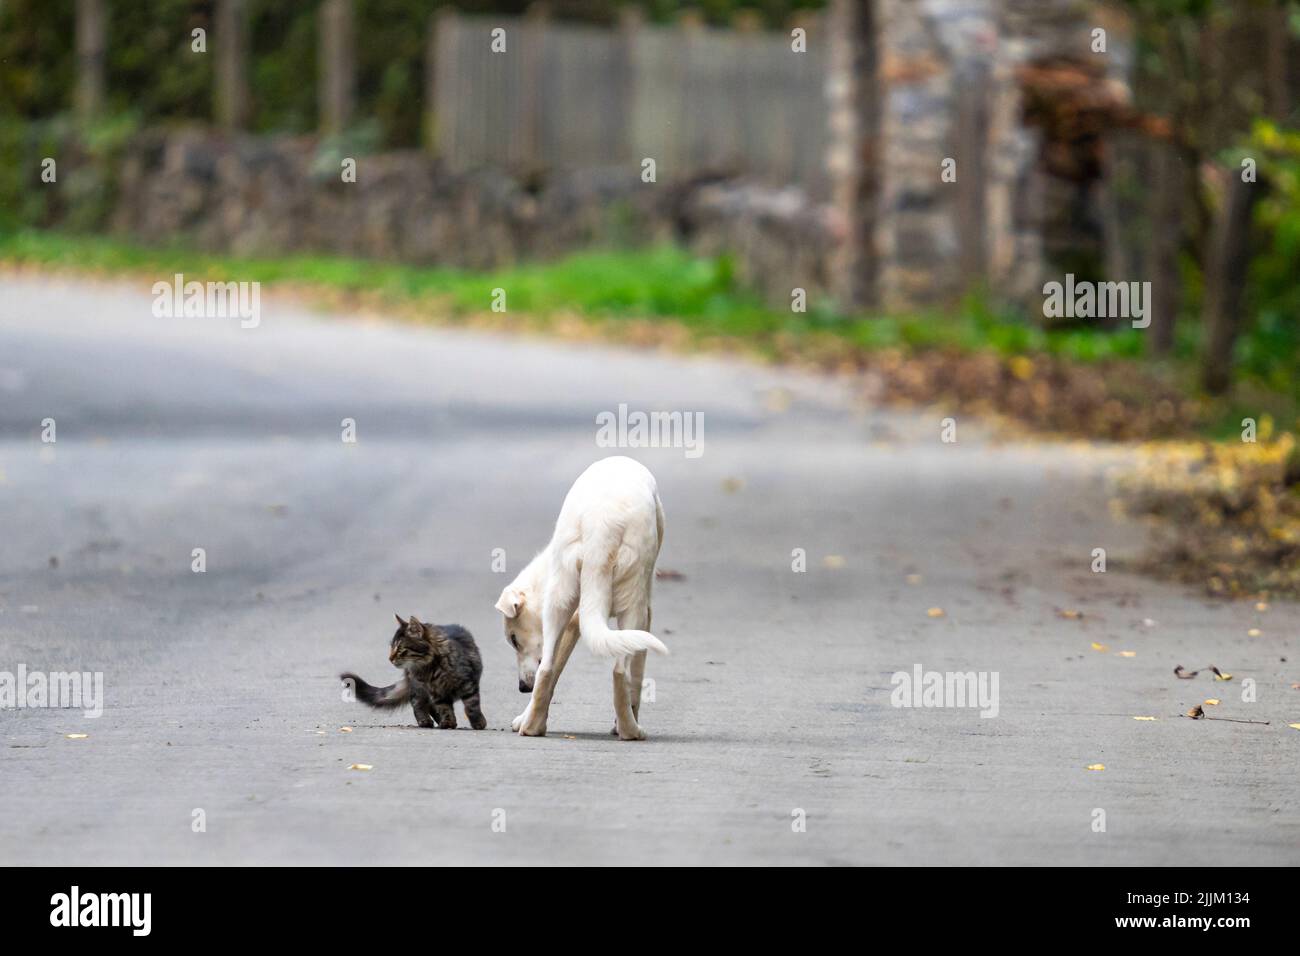 Playful black cat and white dog wandering together outdoors Stock Photo